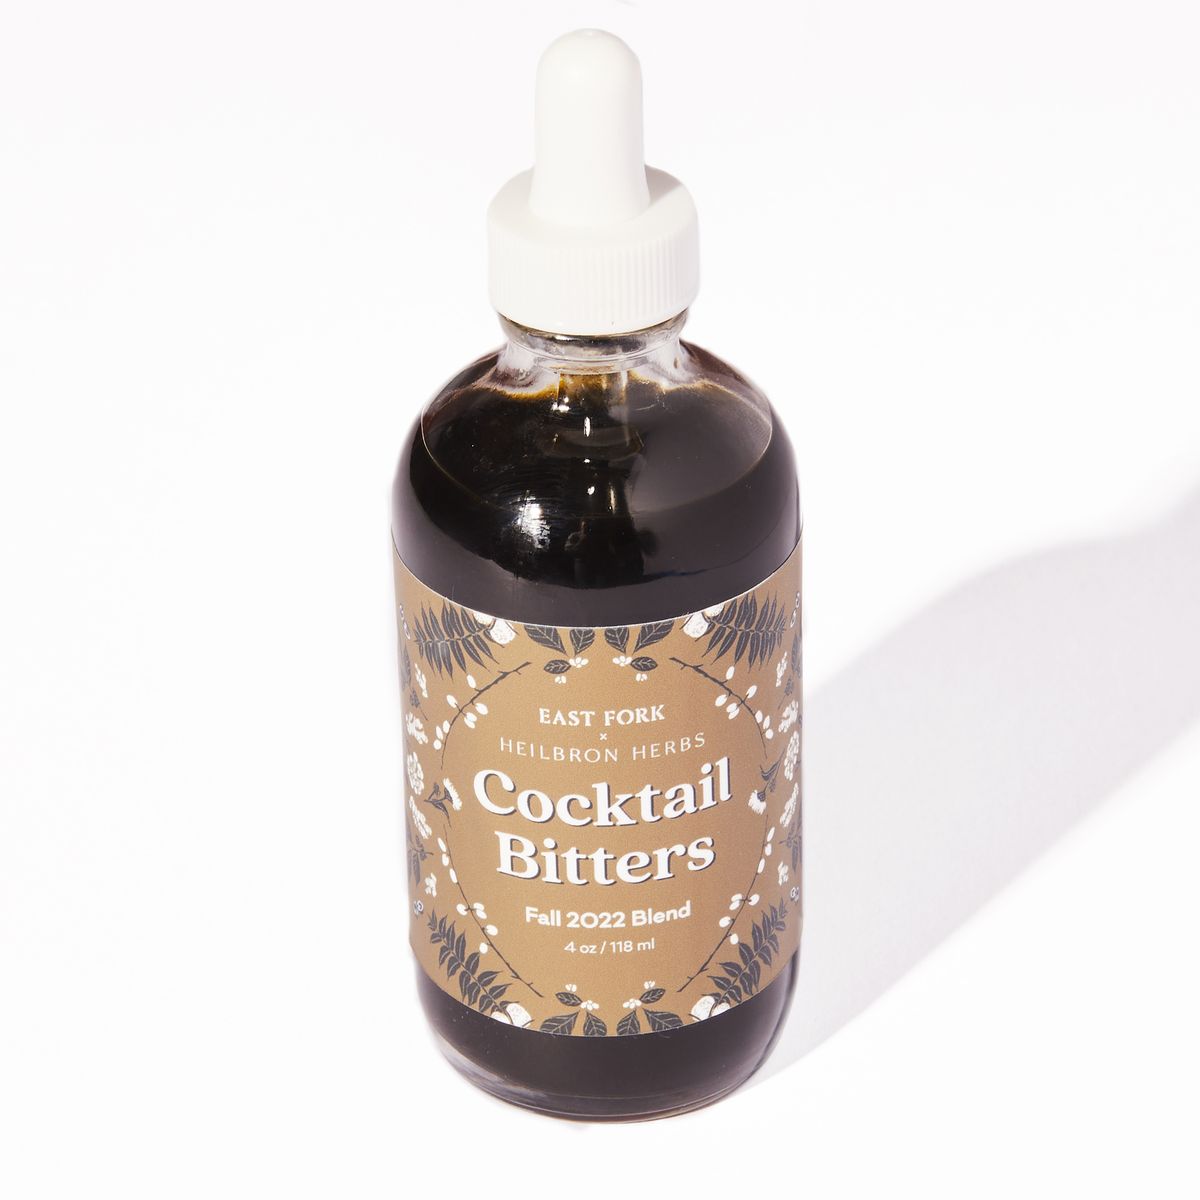 Small clear dropper bottle with liquid and a gold label that reads 'Cocktail Bitters'